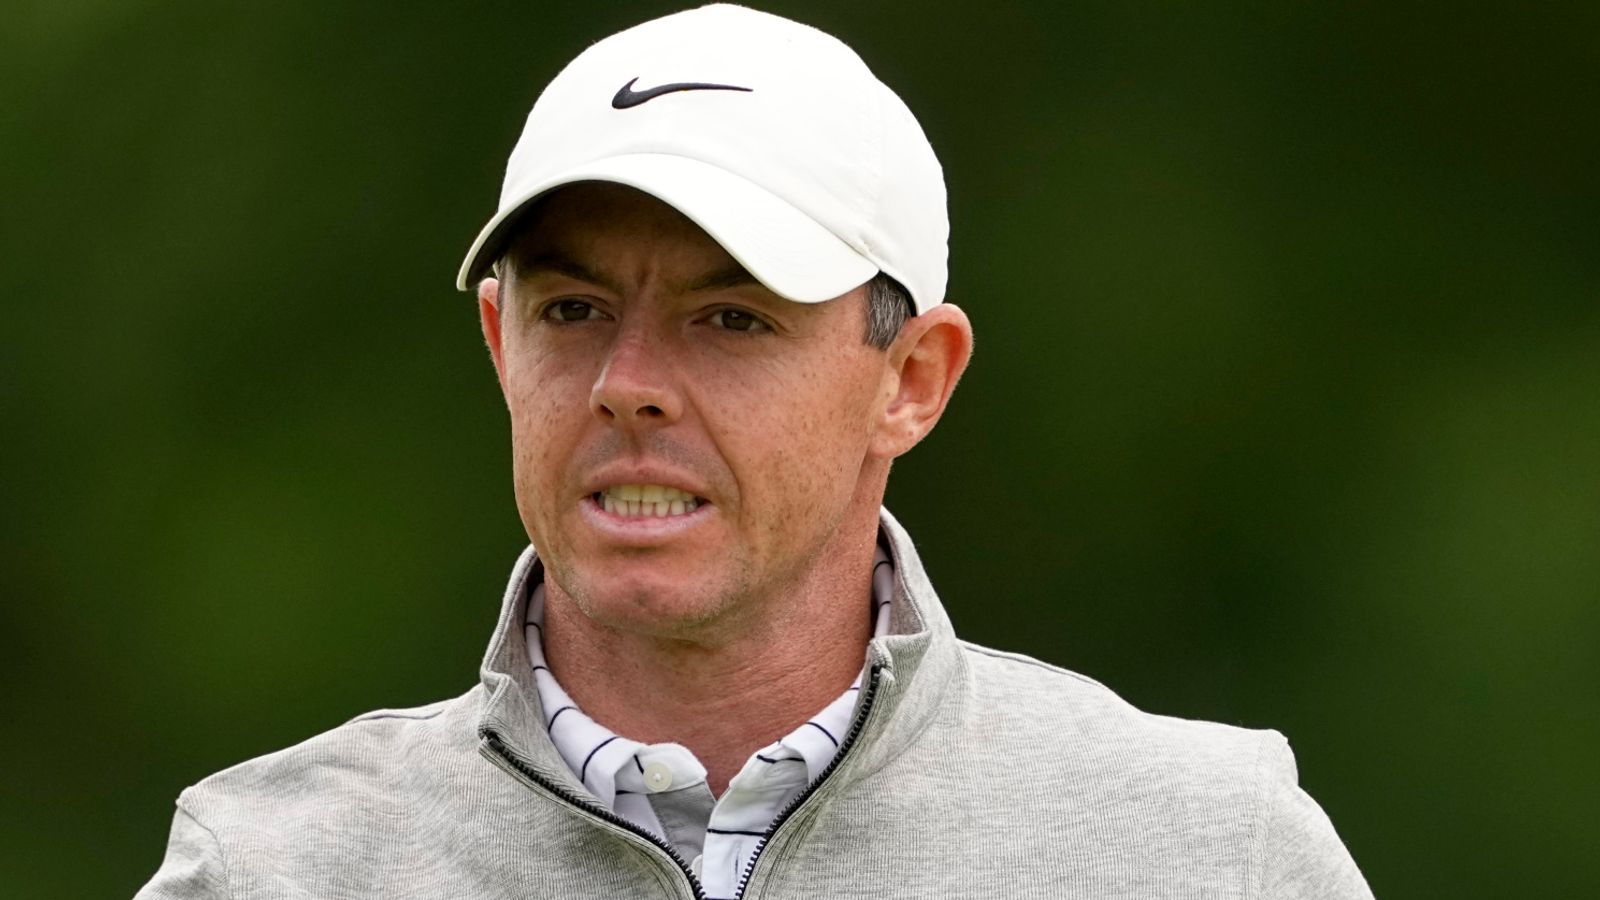 Rory McIlroy sees PGA Championship as ‘one that got away’